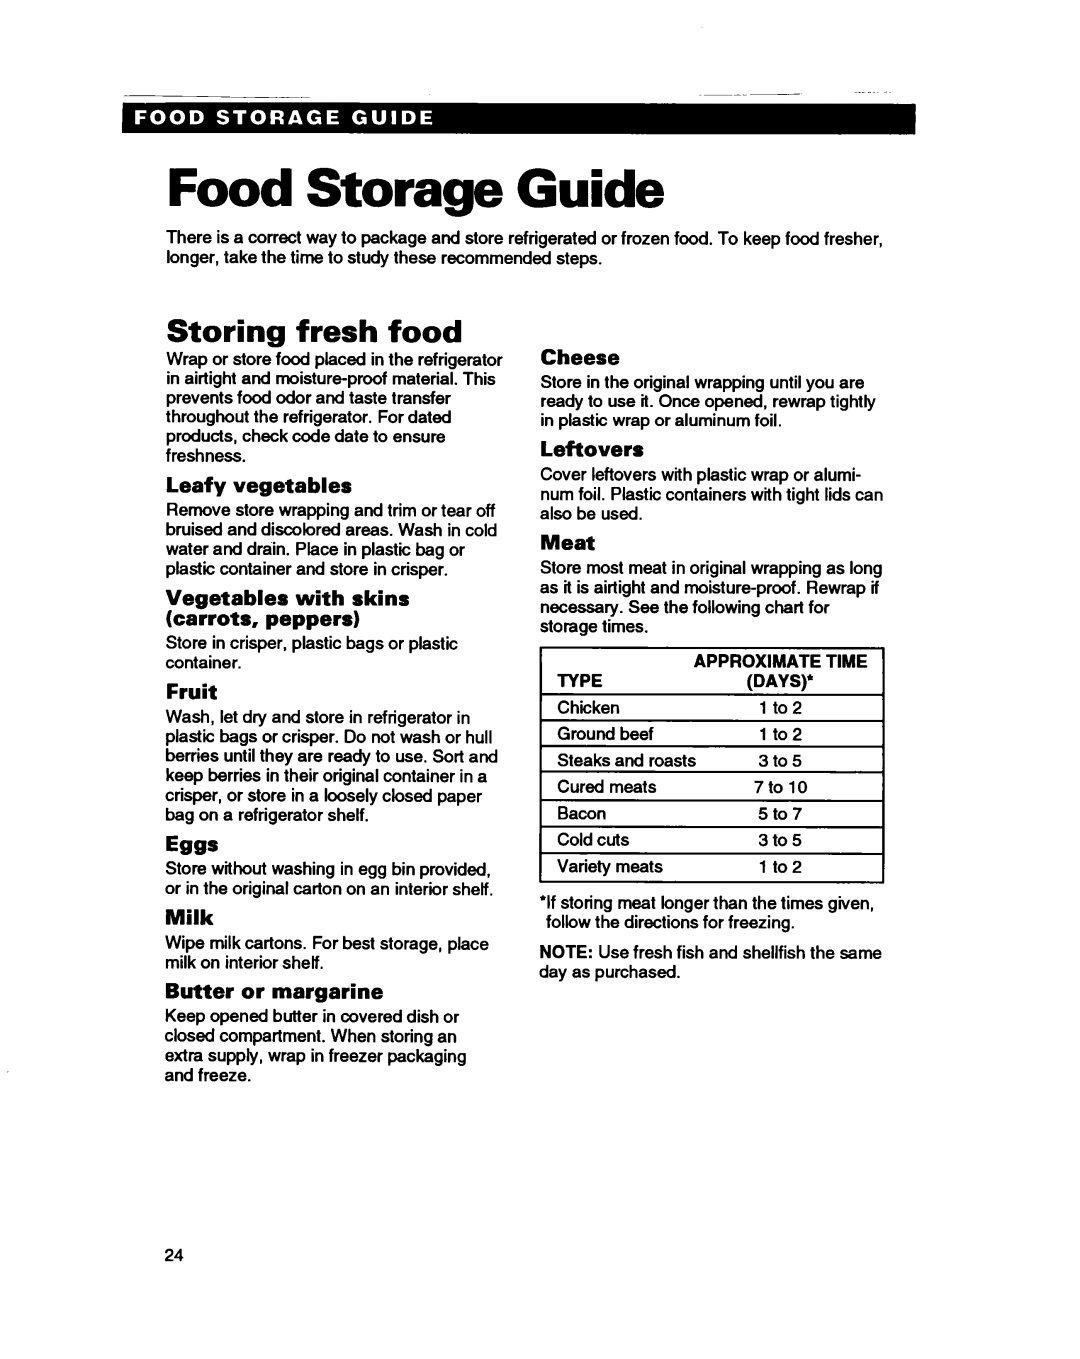 Whirlpool ED25PB Food Storage Guide, Storing fresh food, Leafy vegetables, Vegetables with skins carrots, peppers, Fruit 